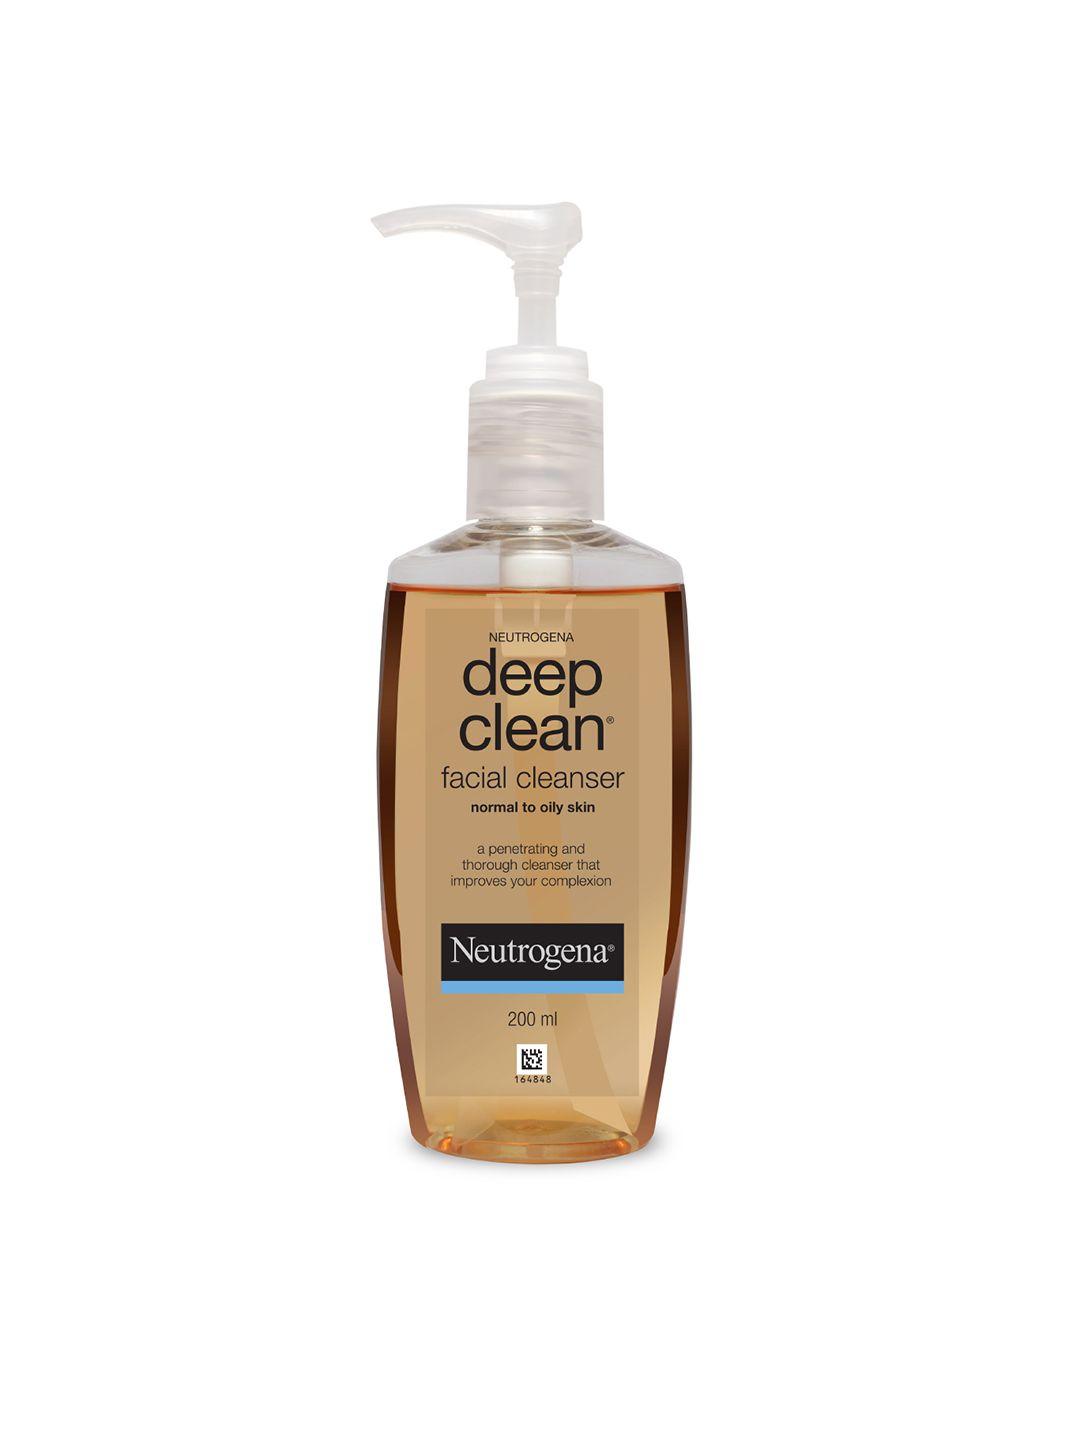 neutrogena deep clean facial cleanser for normal to oily skin - 200 ml